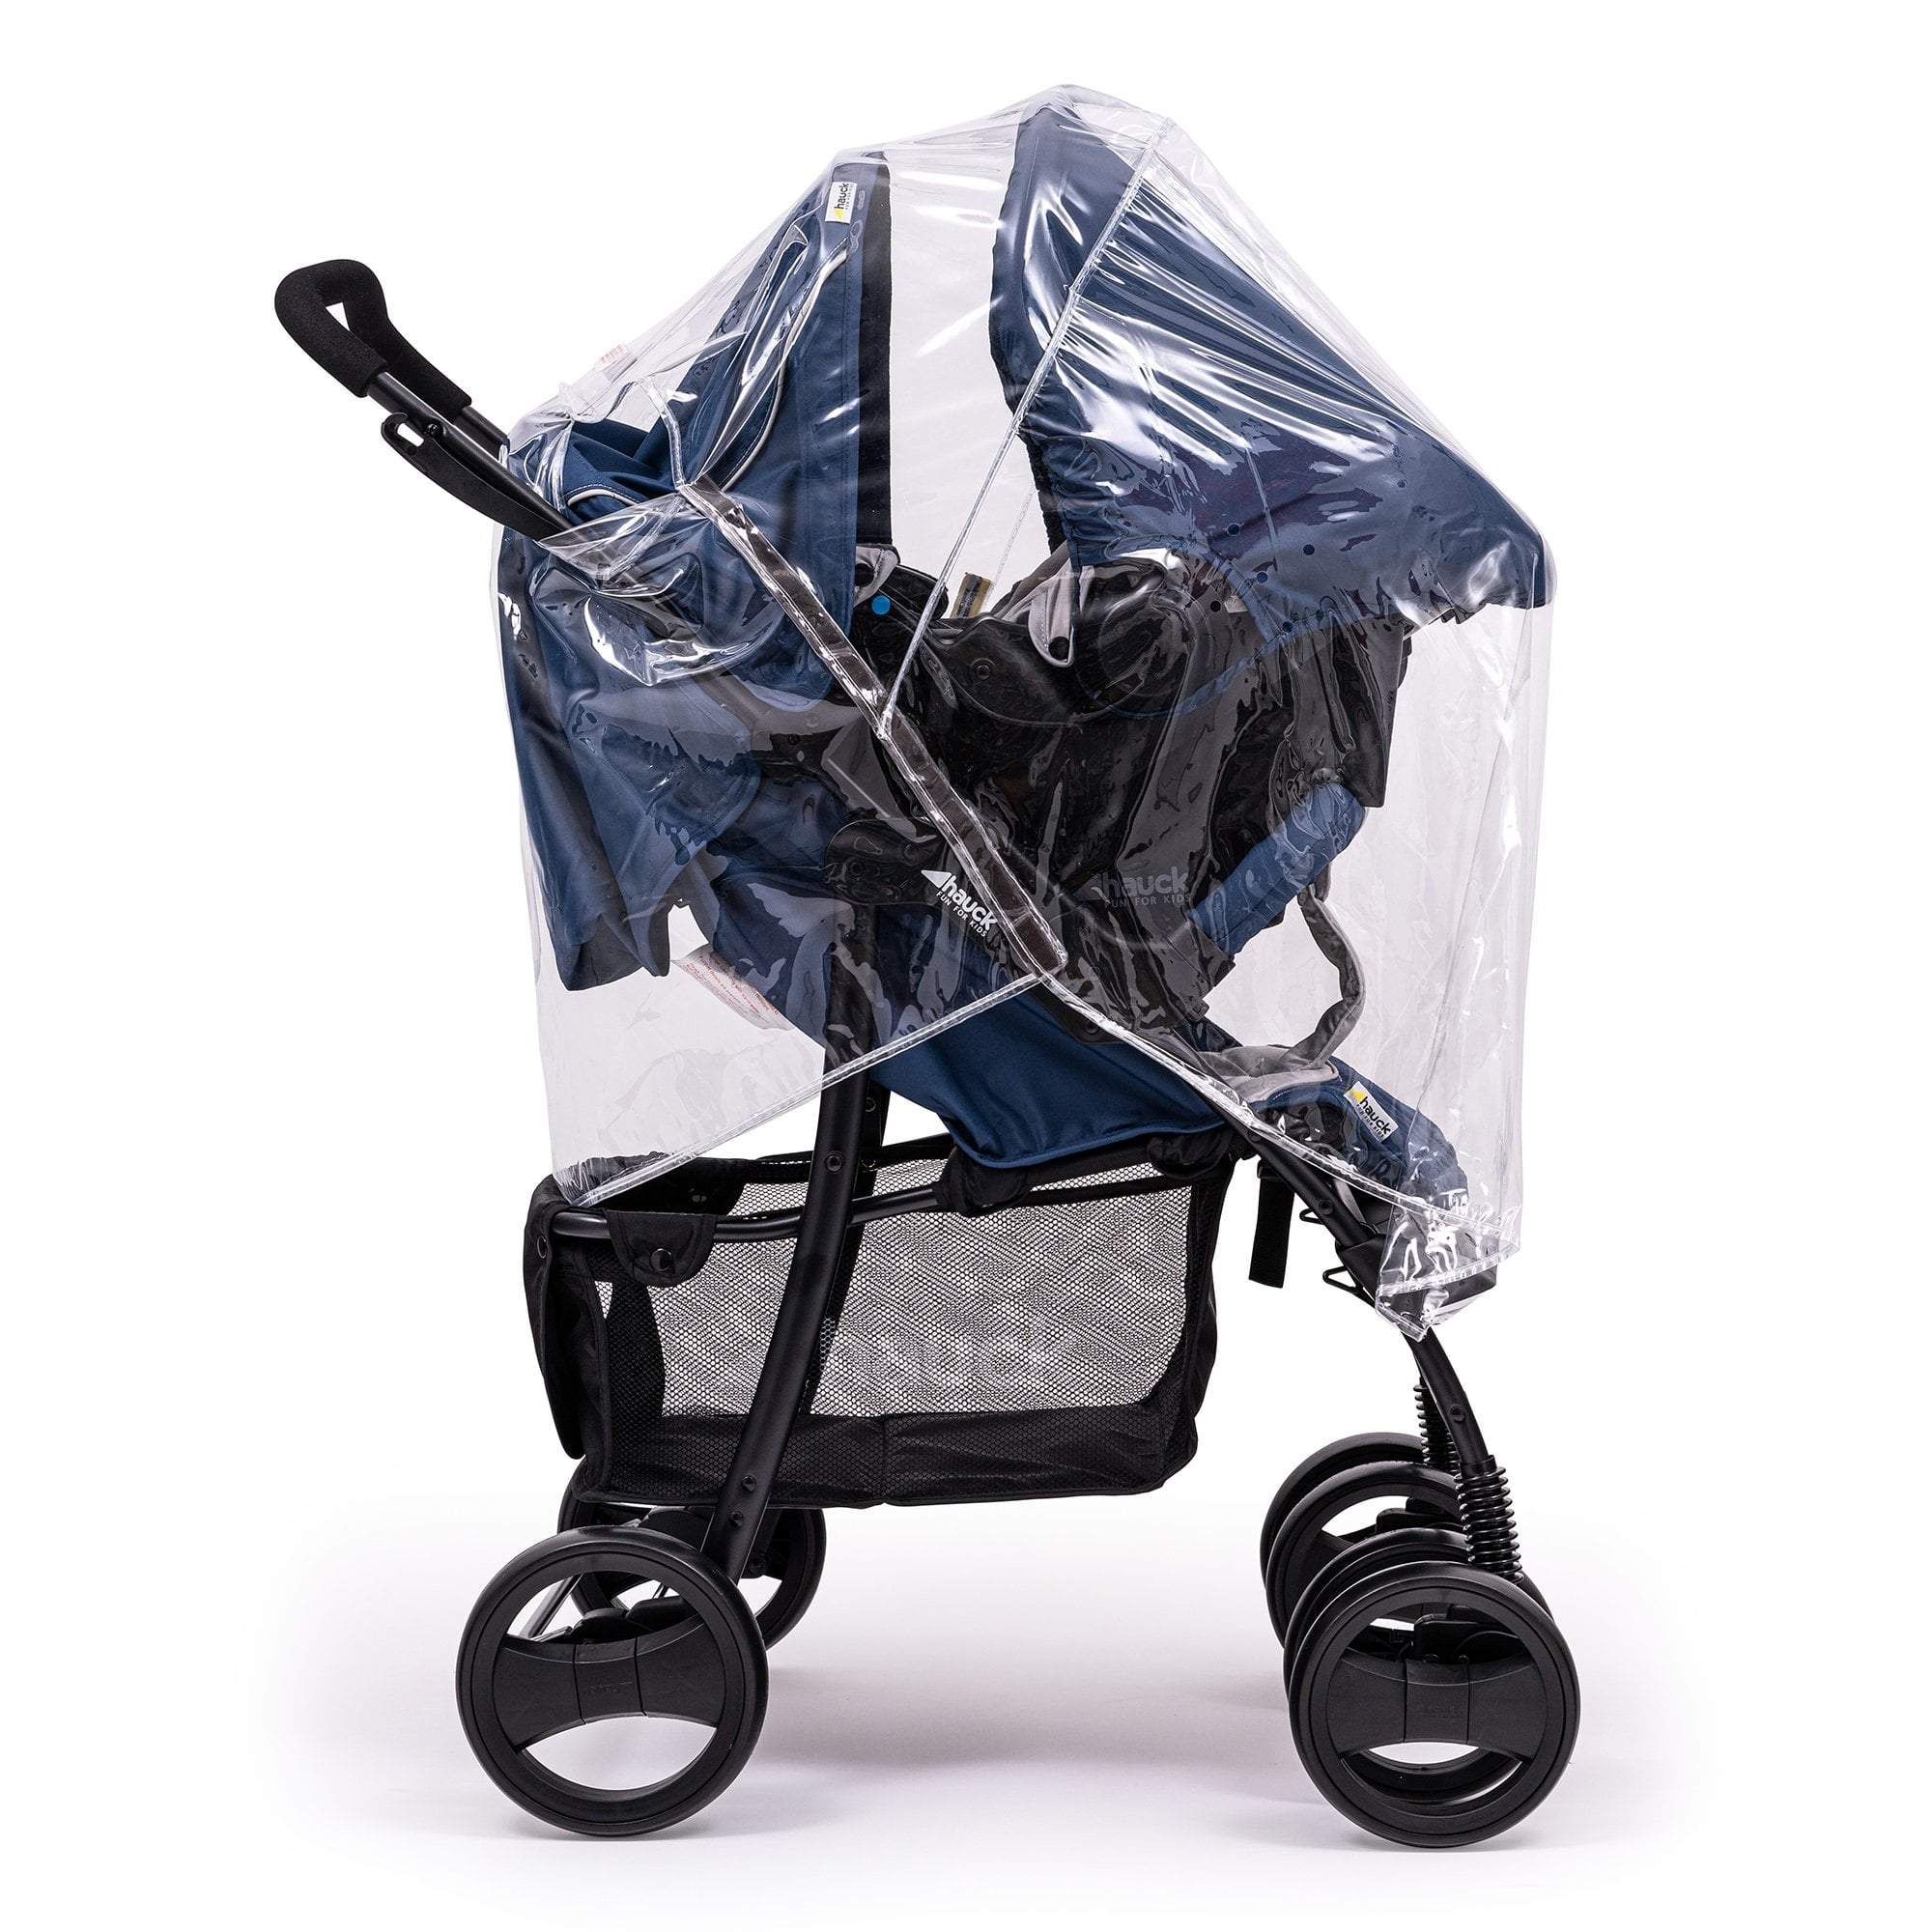 Travel System Raincover Compatible with Unilove - Fits All Models - For Your Little One